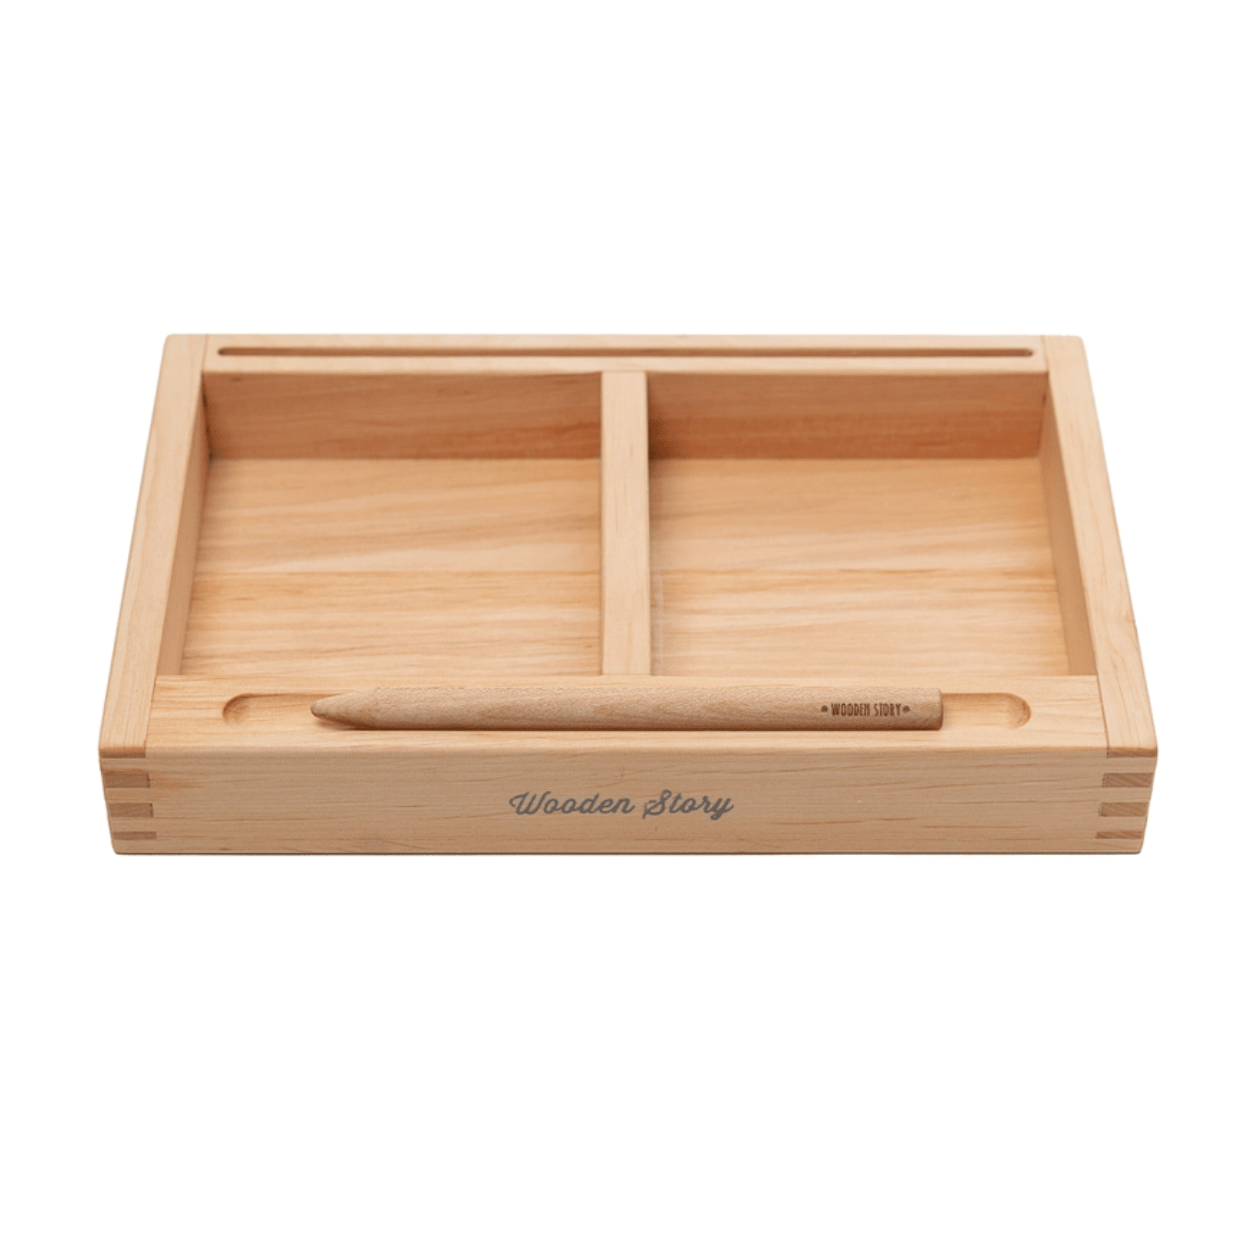 Wooden Story Building & Stacking Handmade Montessori Learning Tray (2 Parts) by Wooden Story